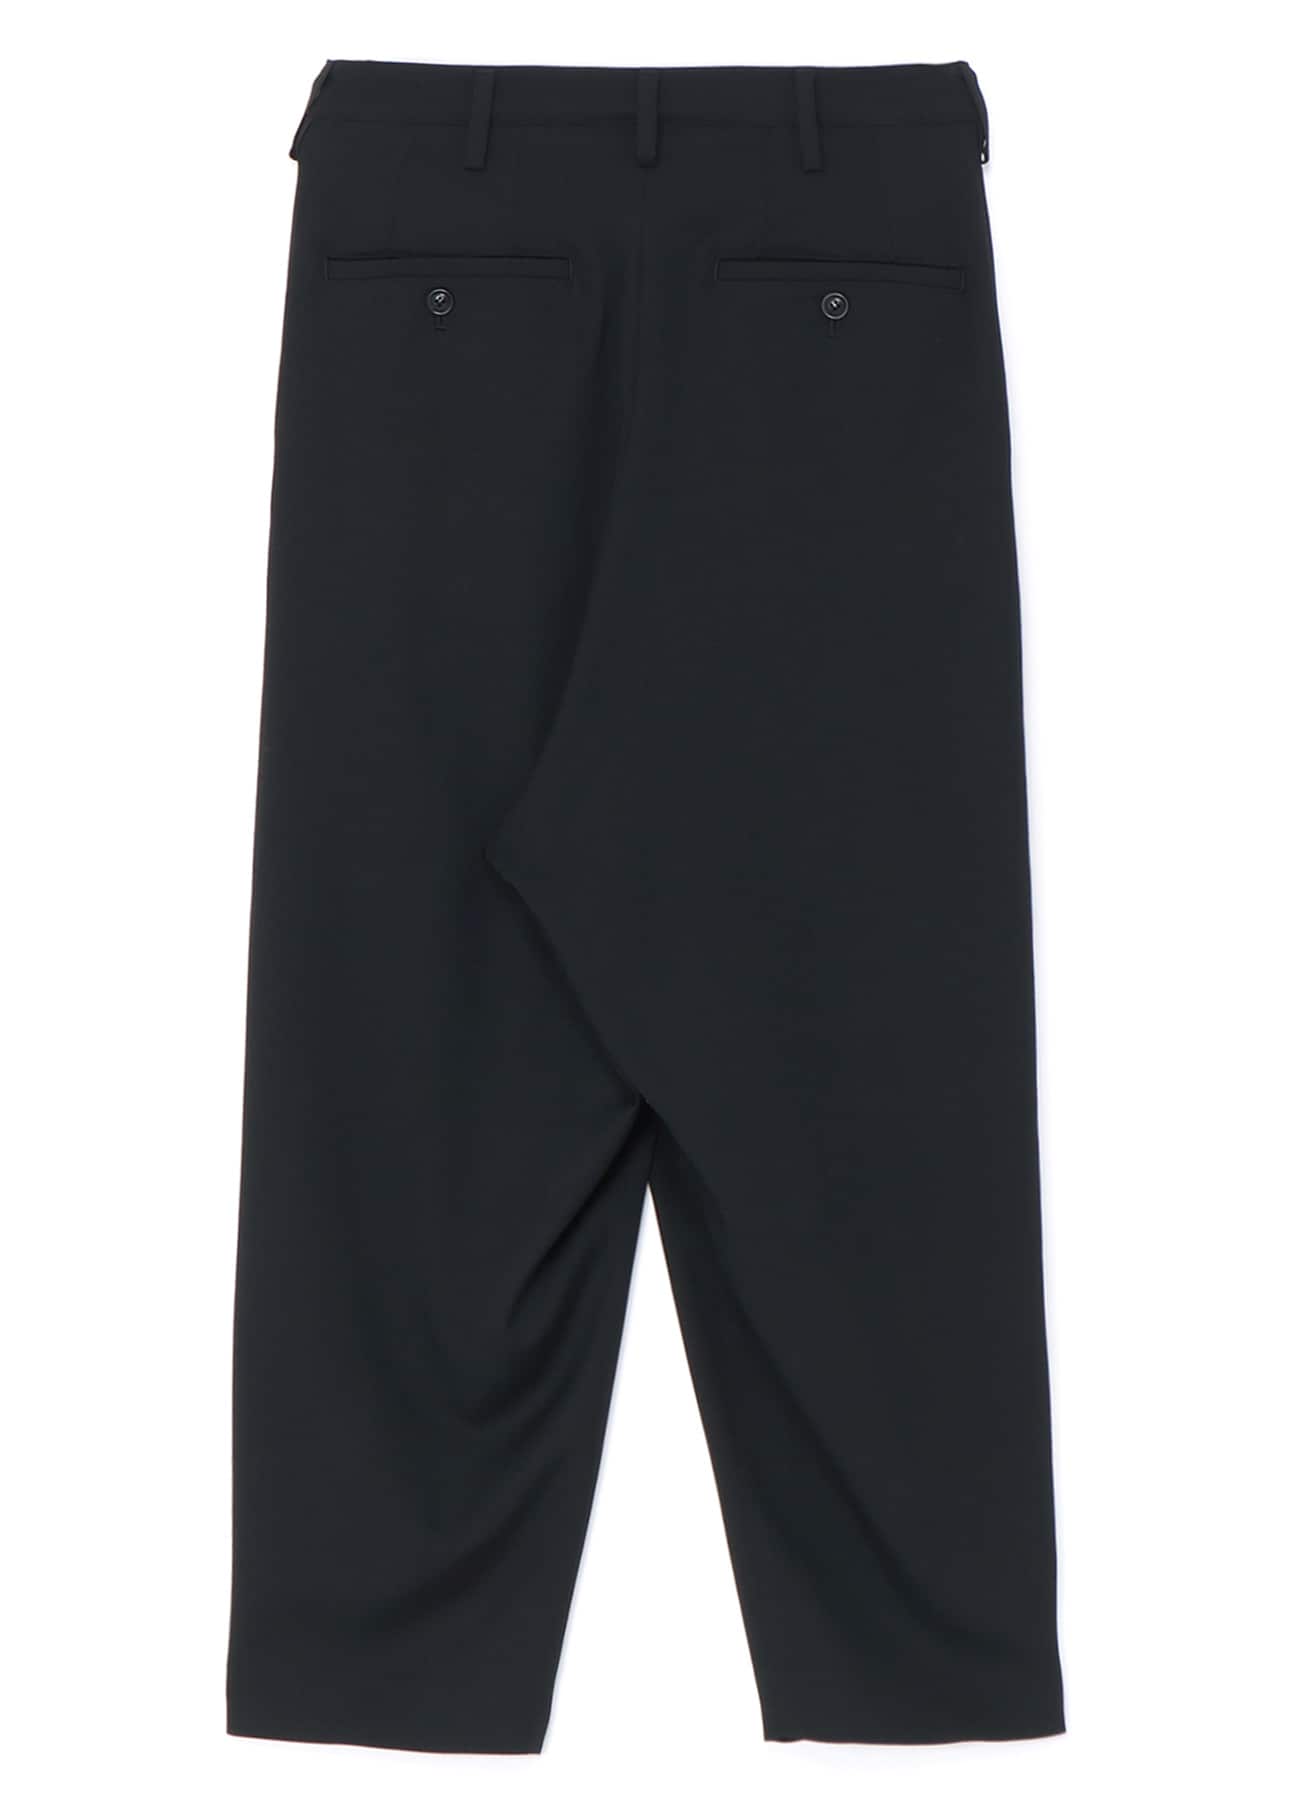 WOOL GABARDINE TAPERED DOUBLE PLEATED PANTS(XS Black): Y's｜THE 